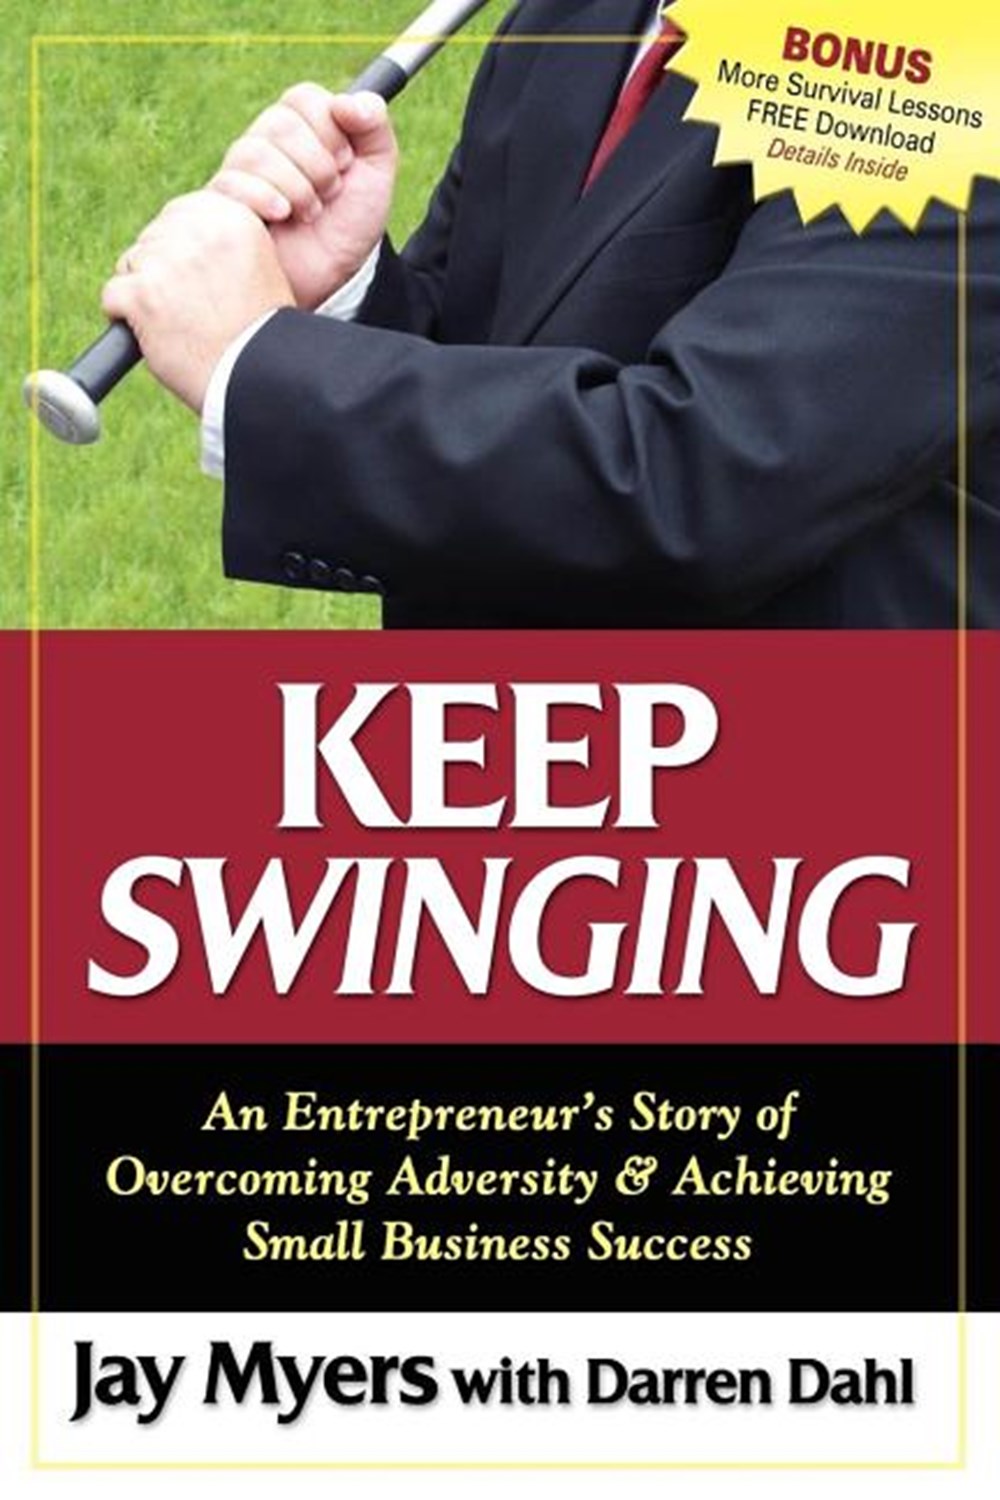 Keep Swinging An Entrepreneur's Story of Overcoming Adversity & Achieving Small Business Success